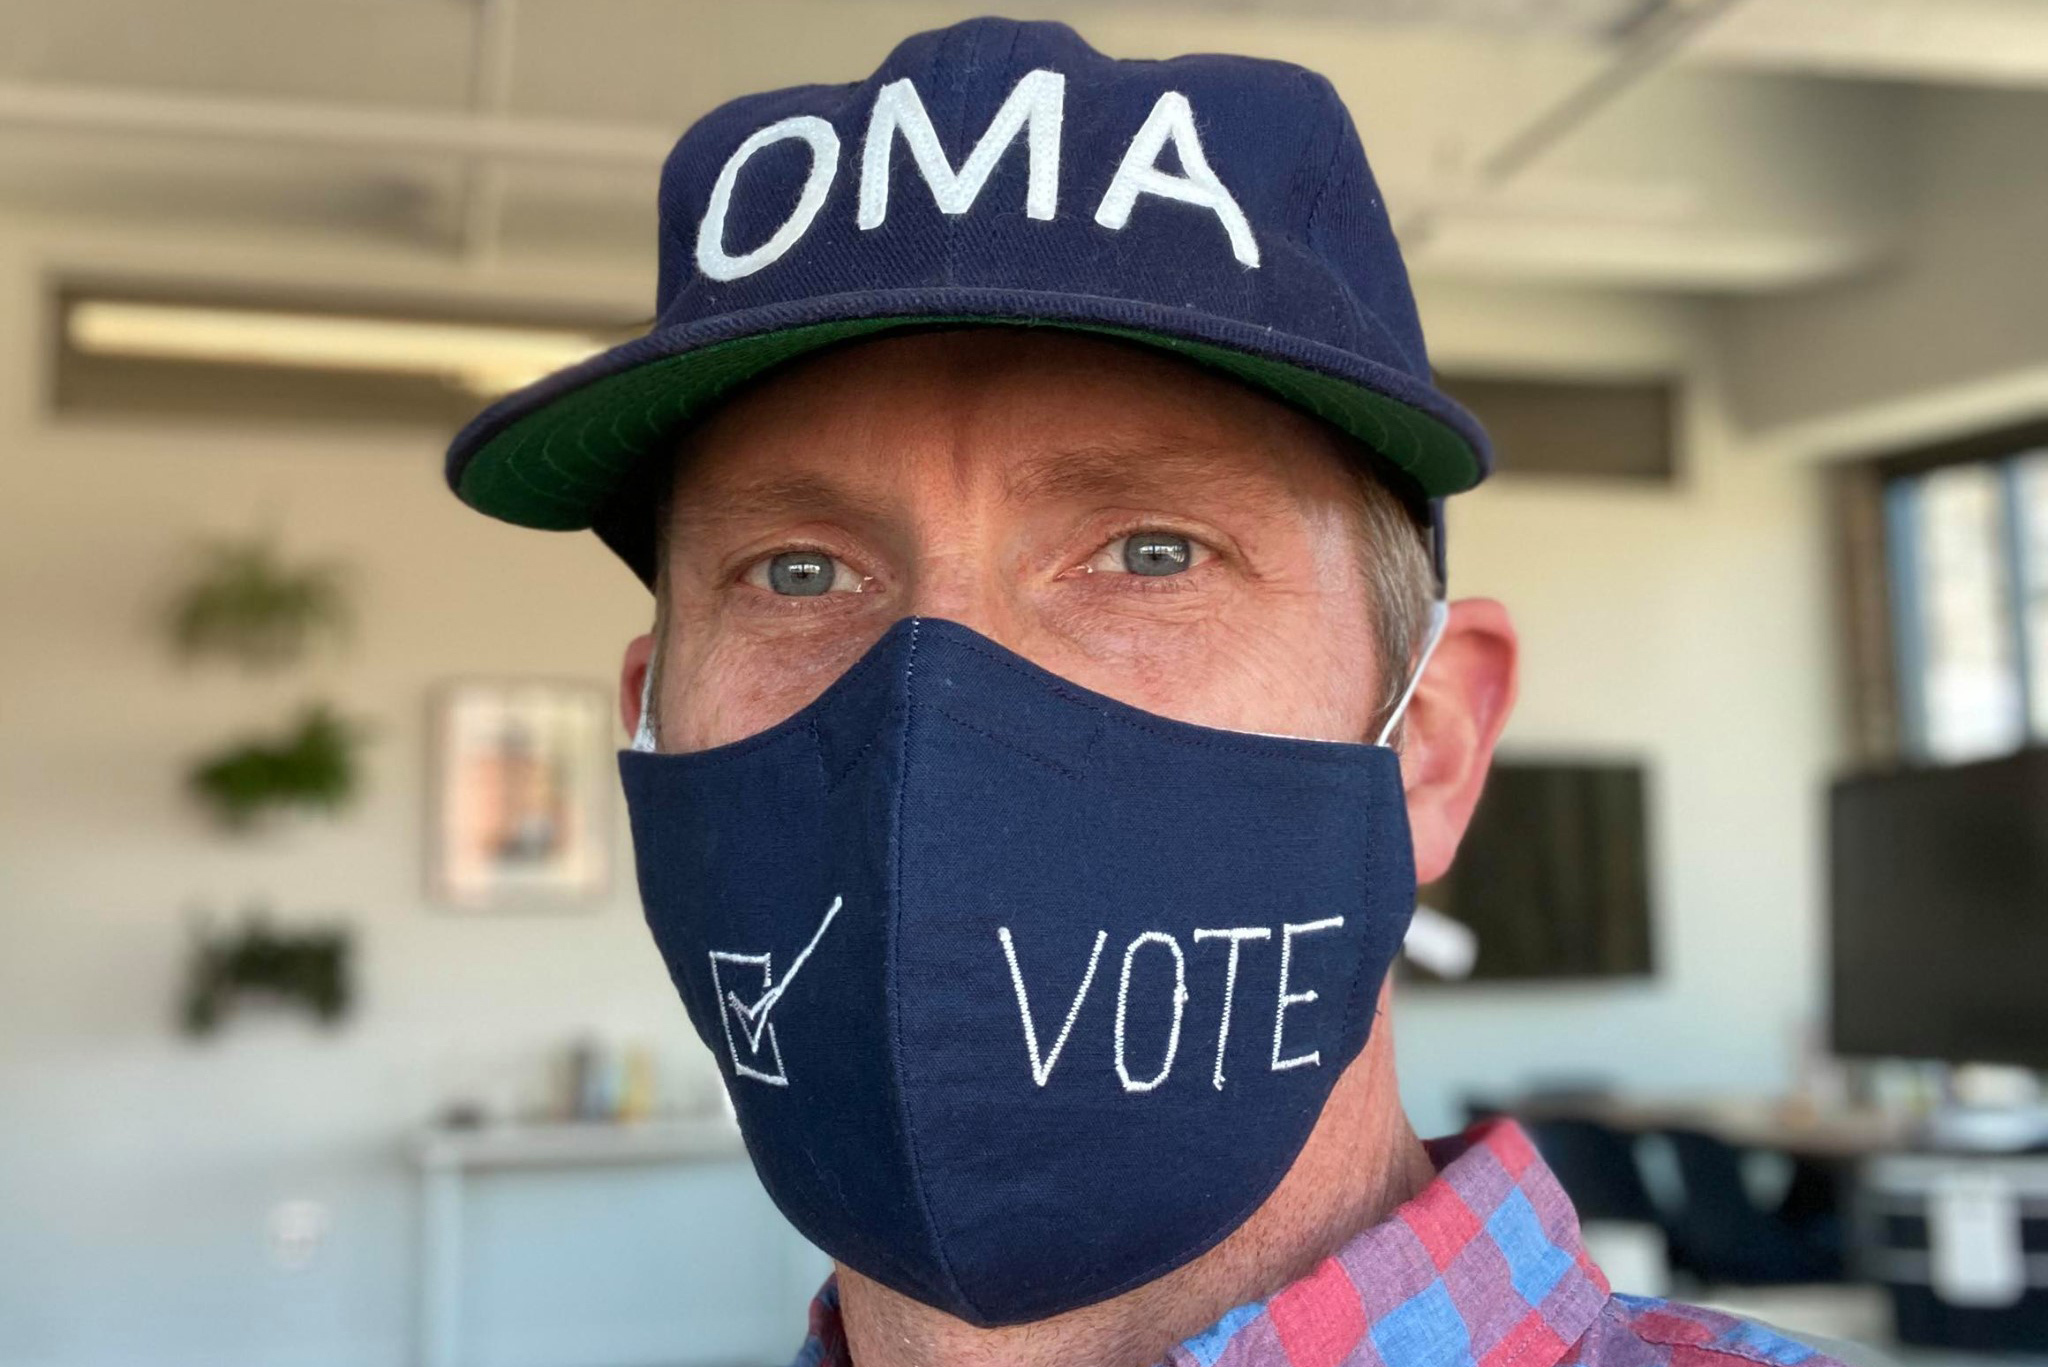 Closeup of Craig Moody with OMA hat and VOTE face mask